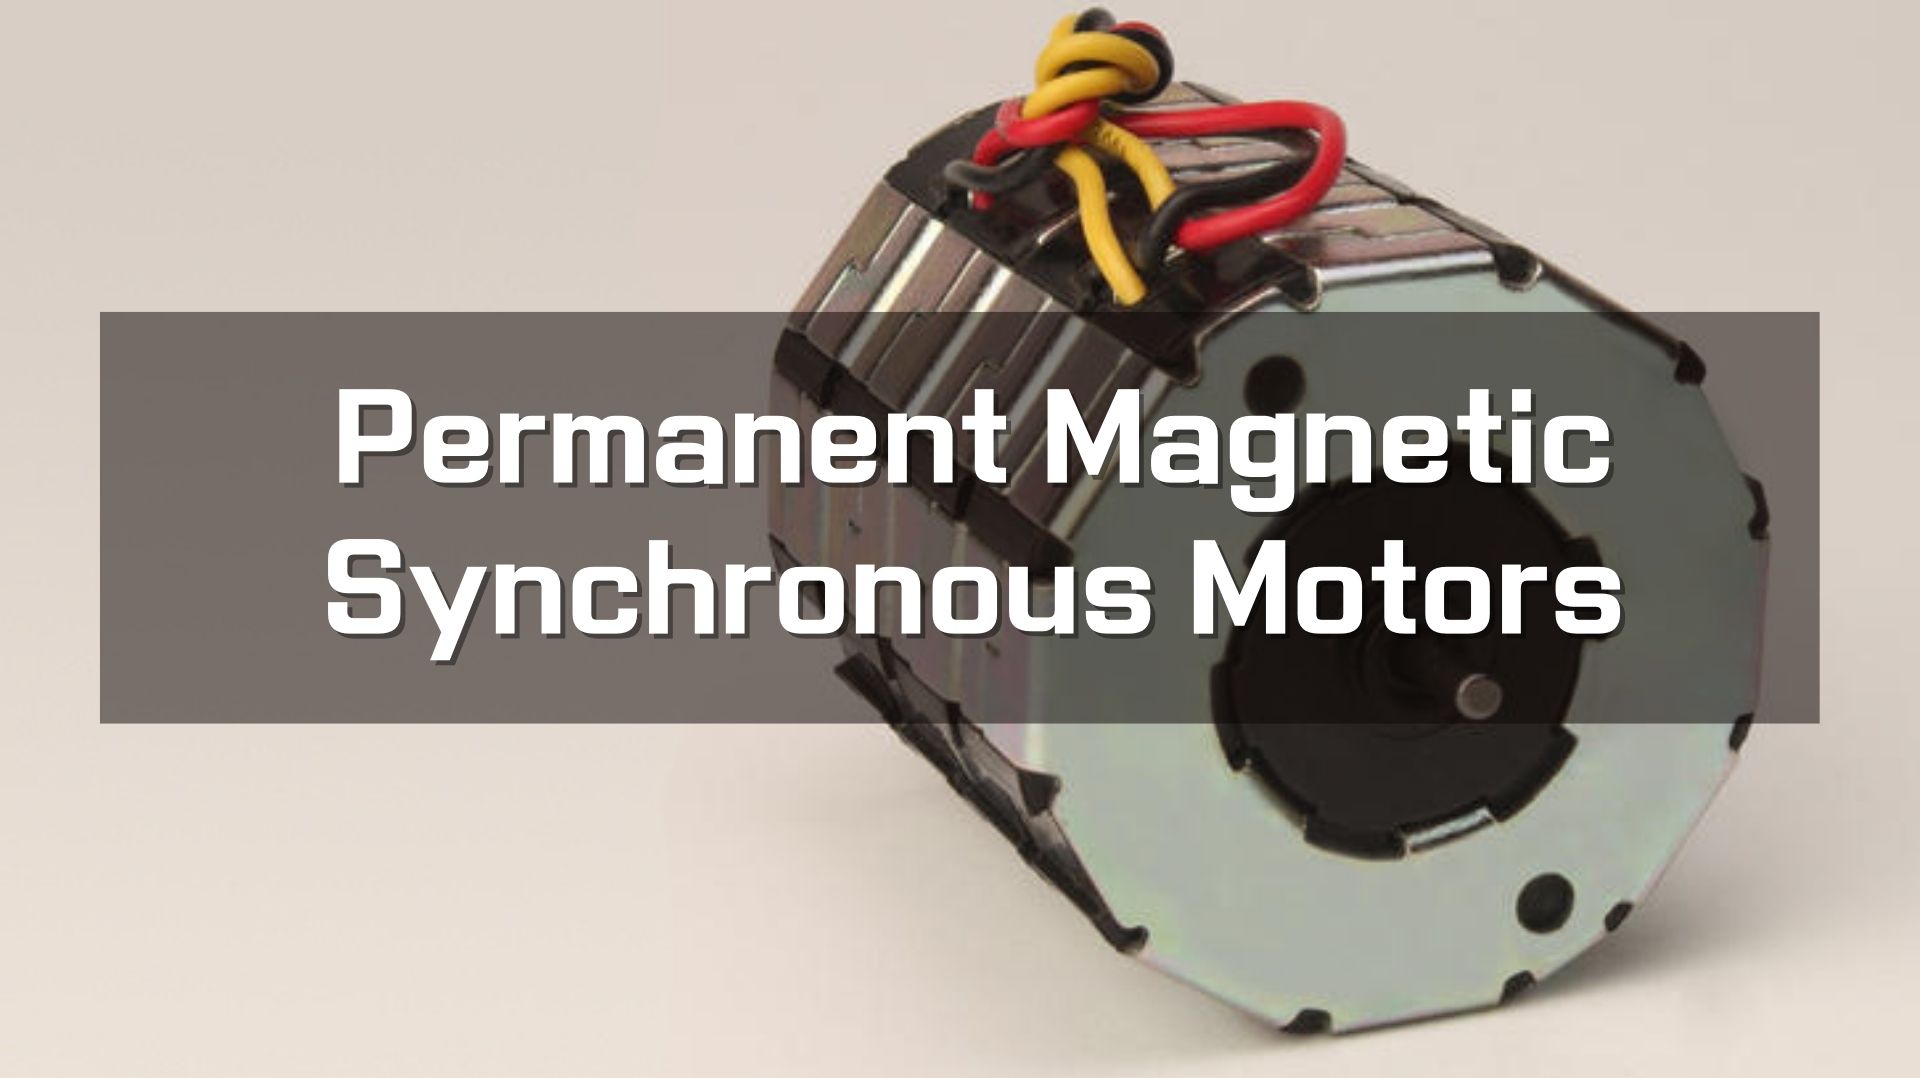 News - Why are permanent magnet motors more efficient?